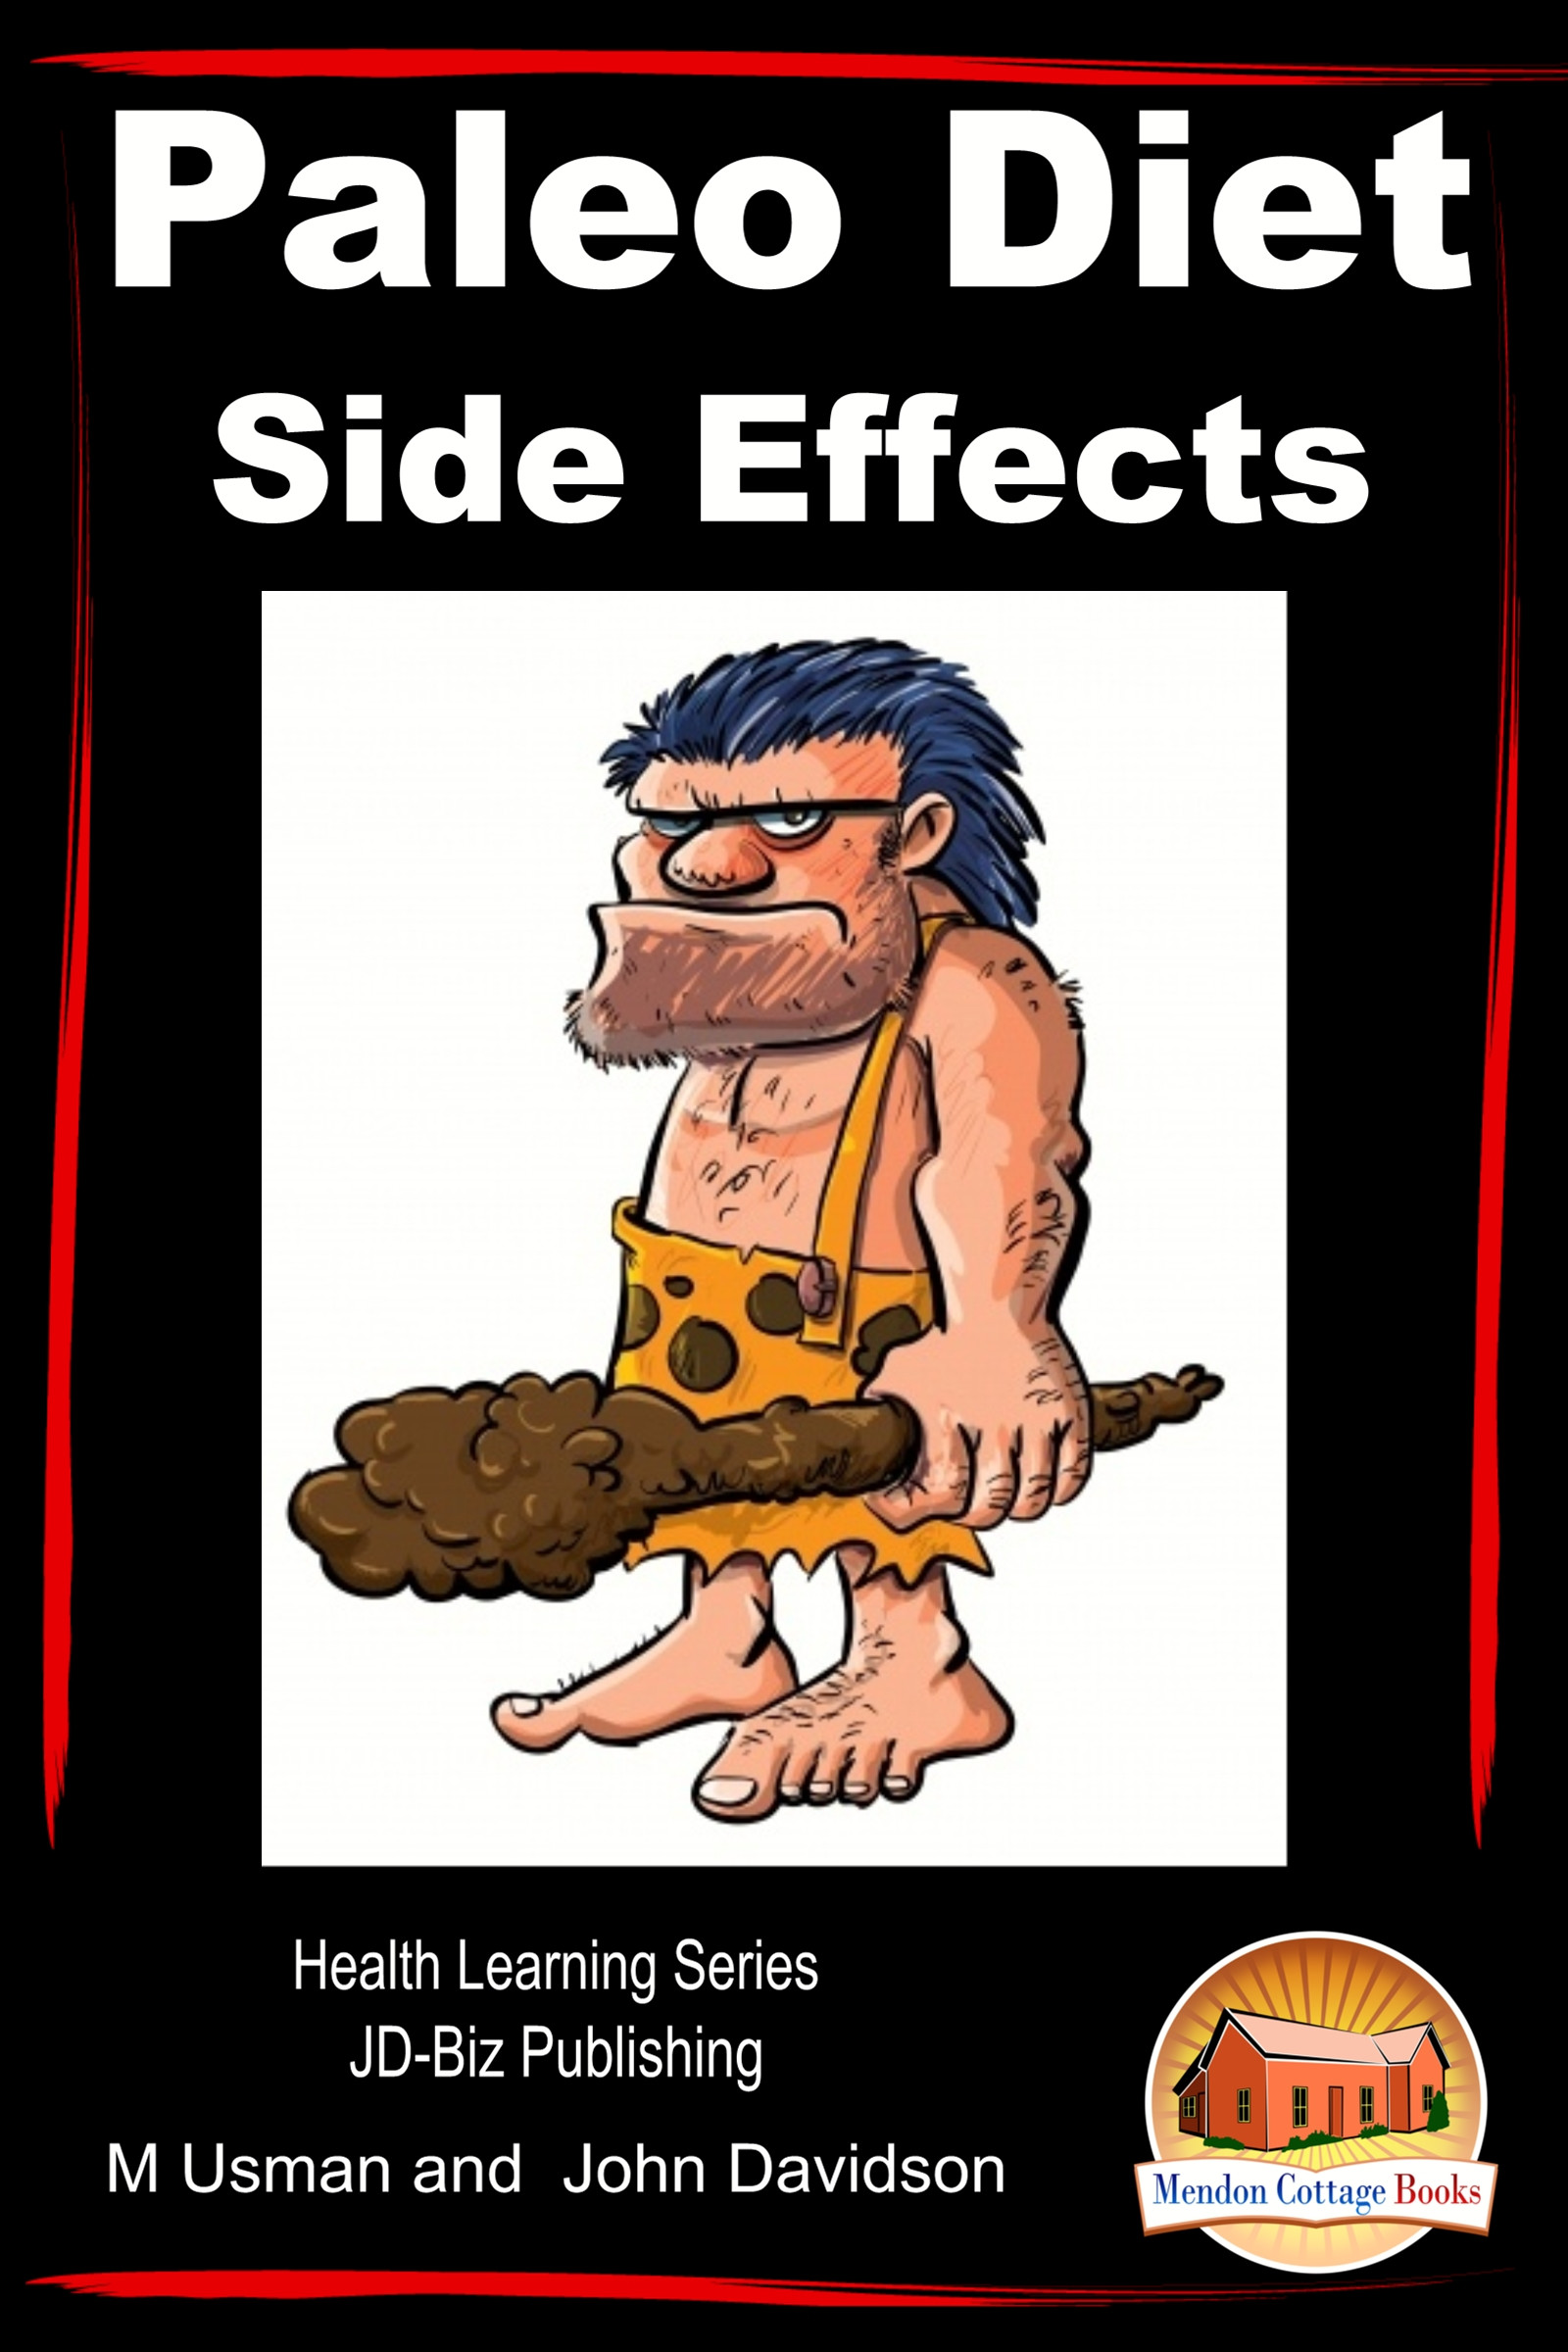 Paleo Diet Side Effects
 Download "Paleo Diet Side Effects Health Learning